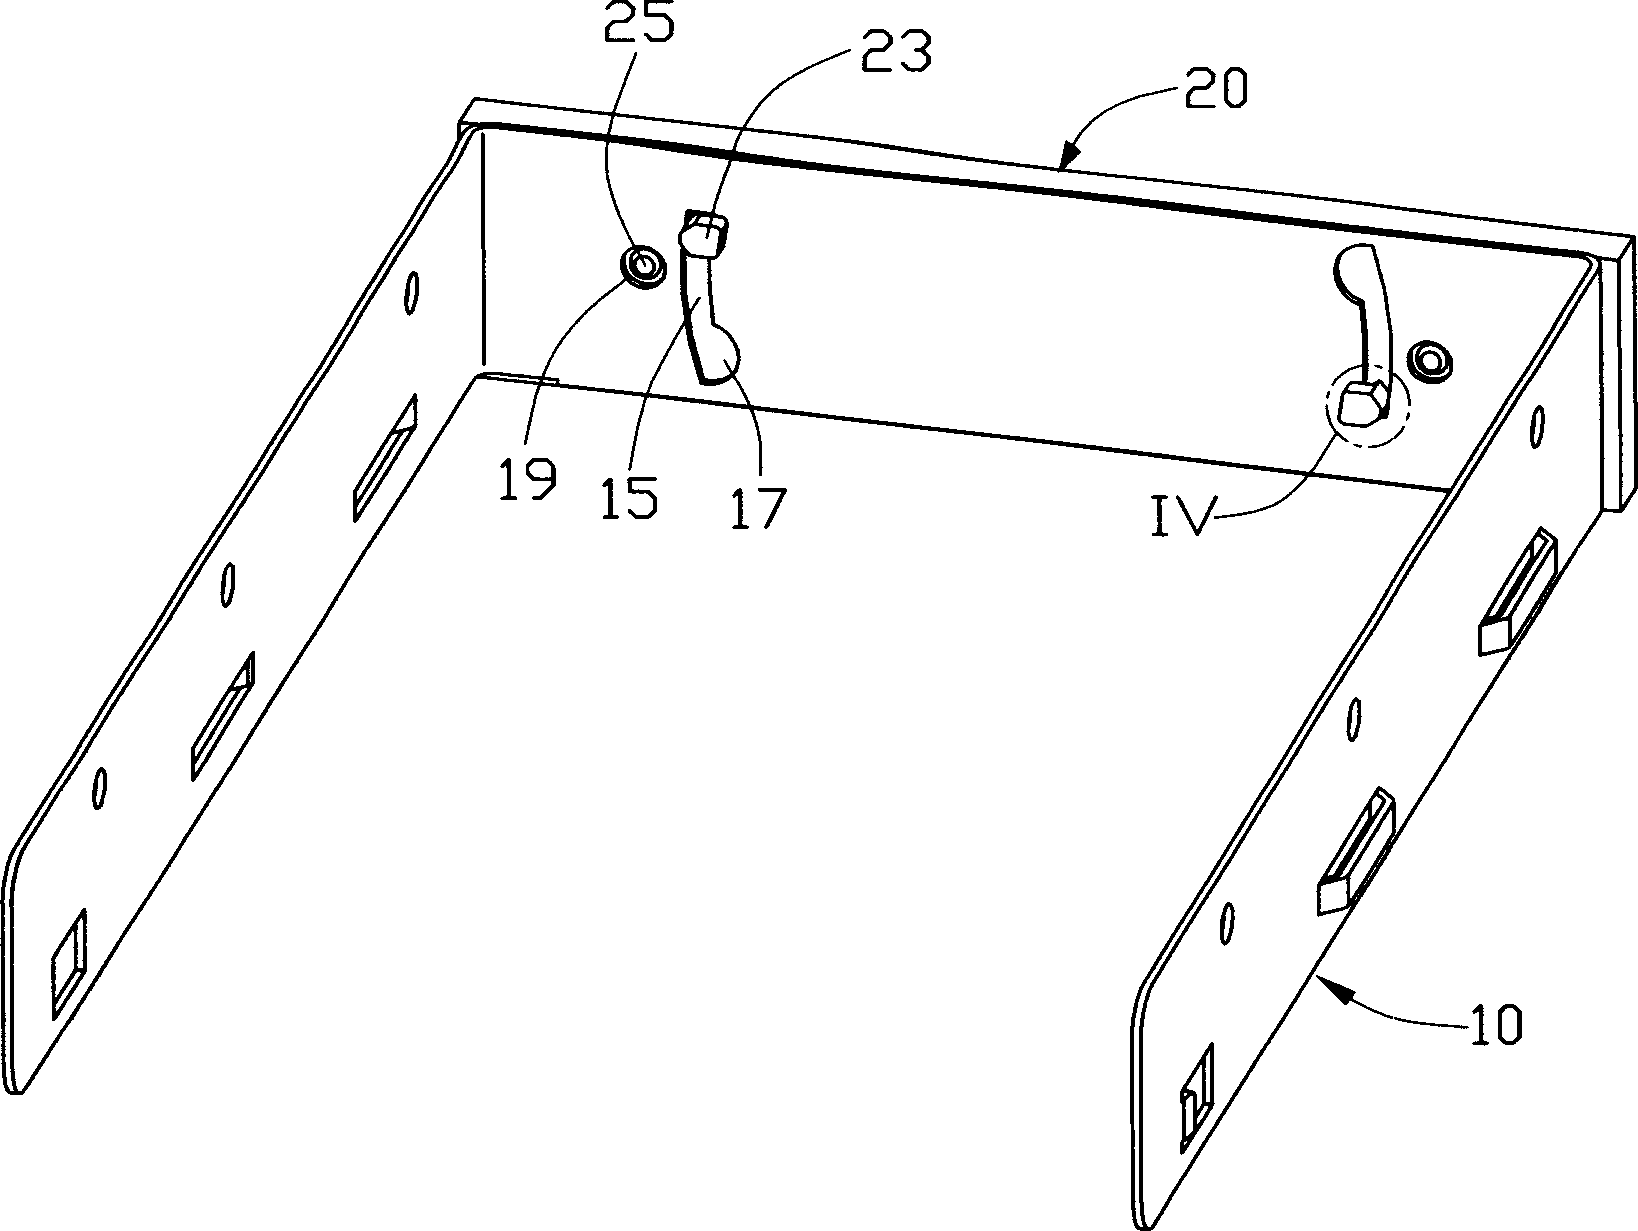 Front panel clamping and buckling method